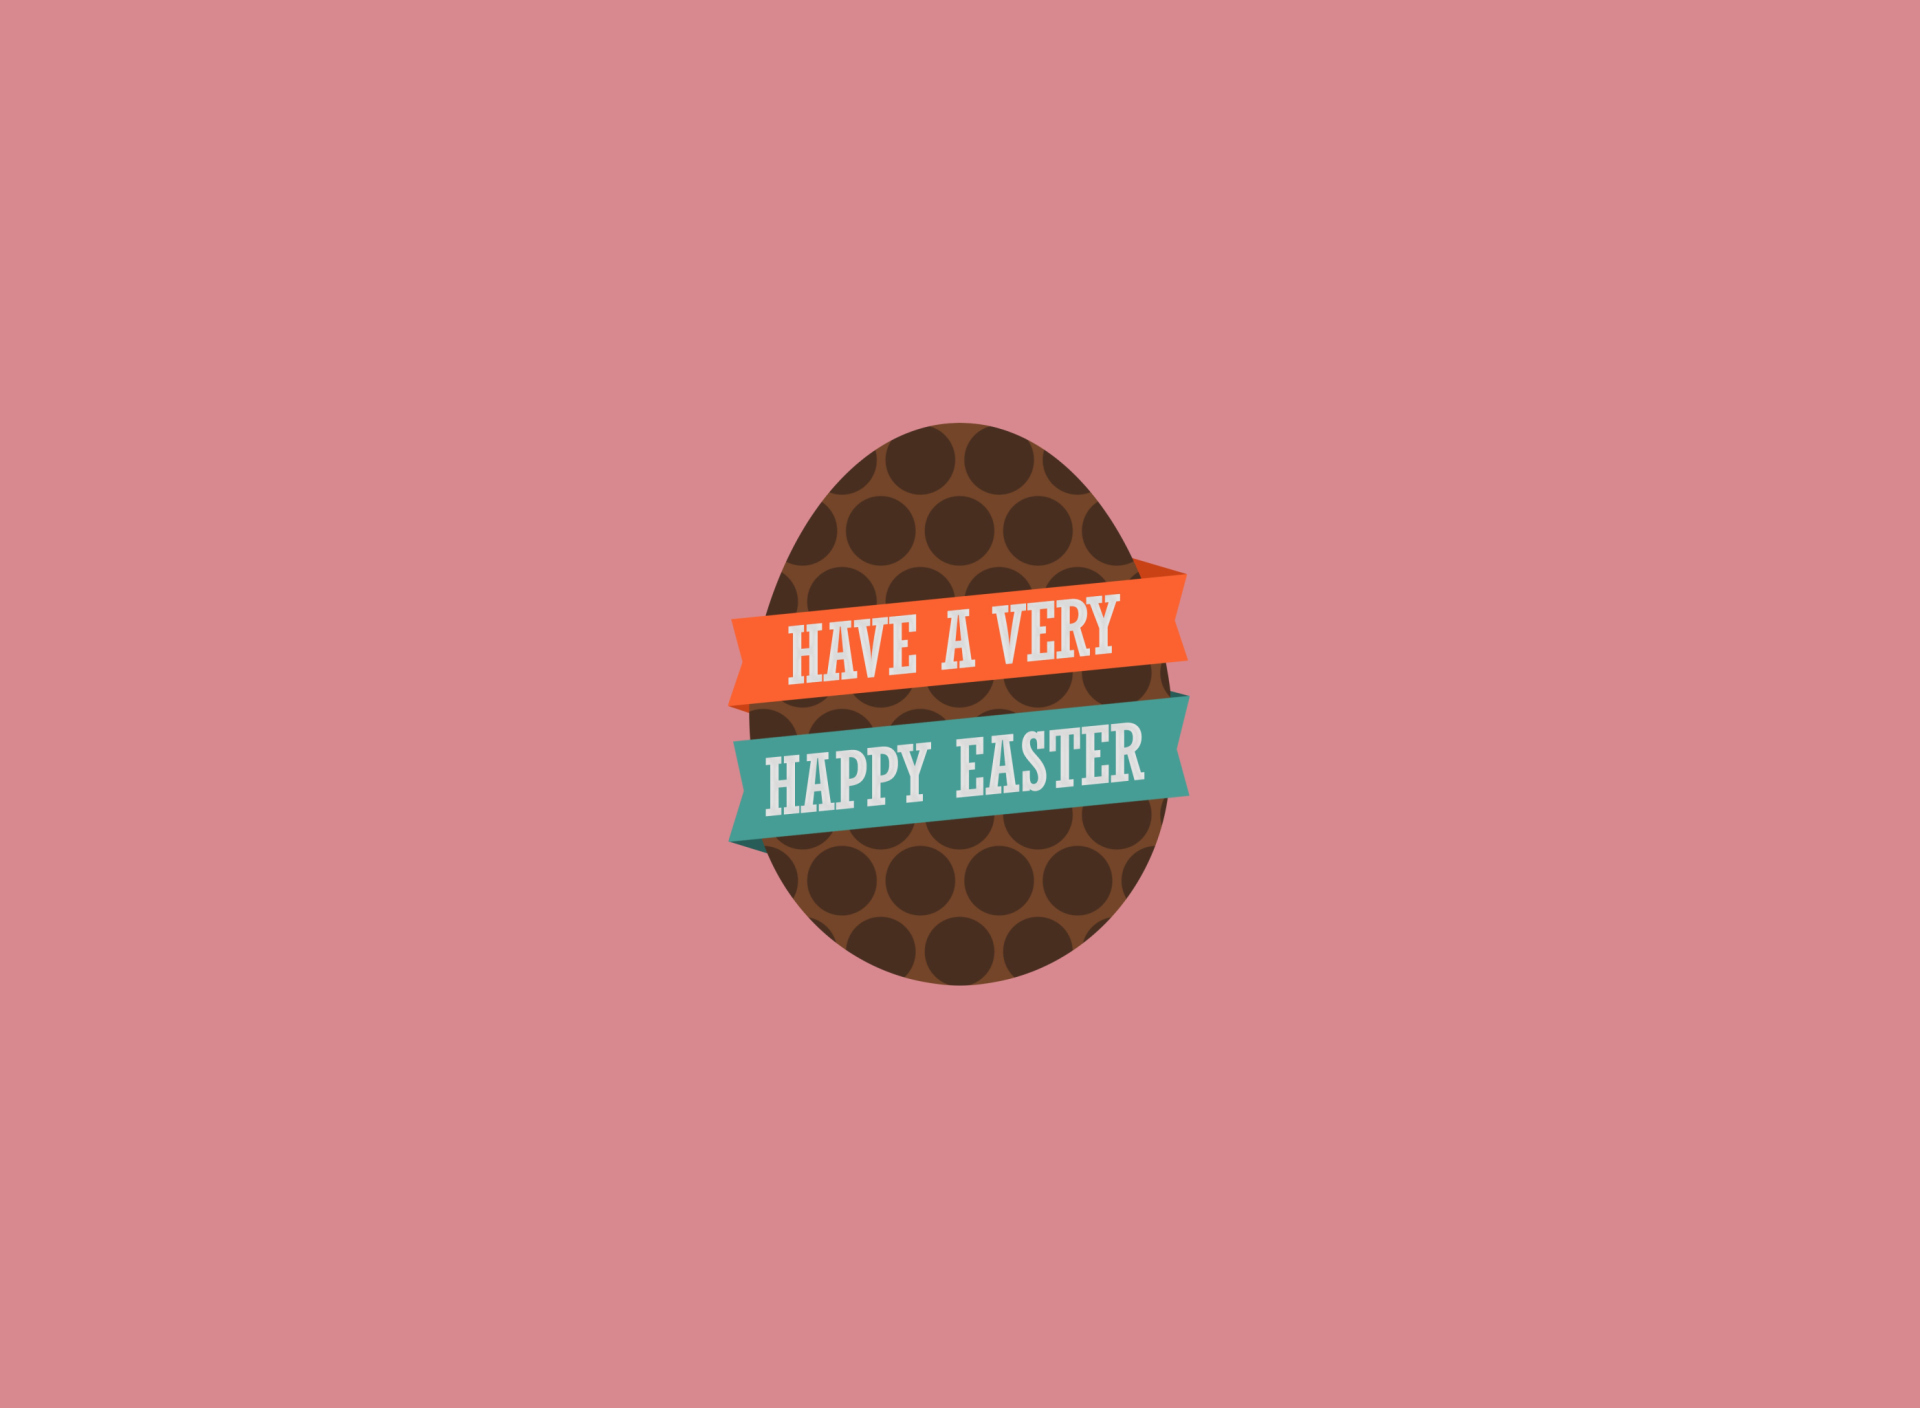 Very Happy Easter Egg wallpaper 1920x1408